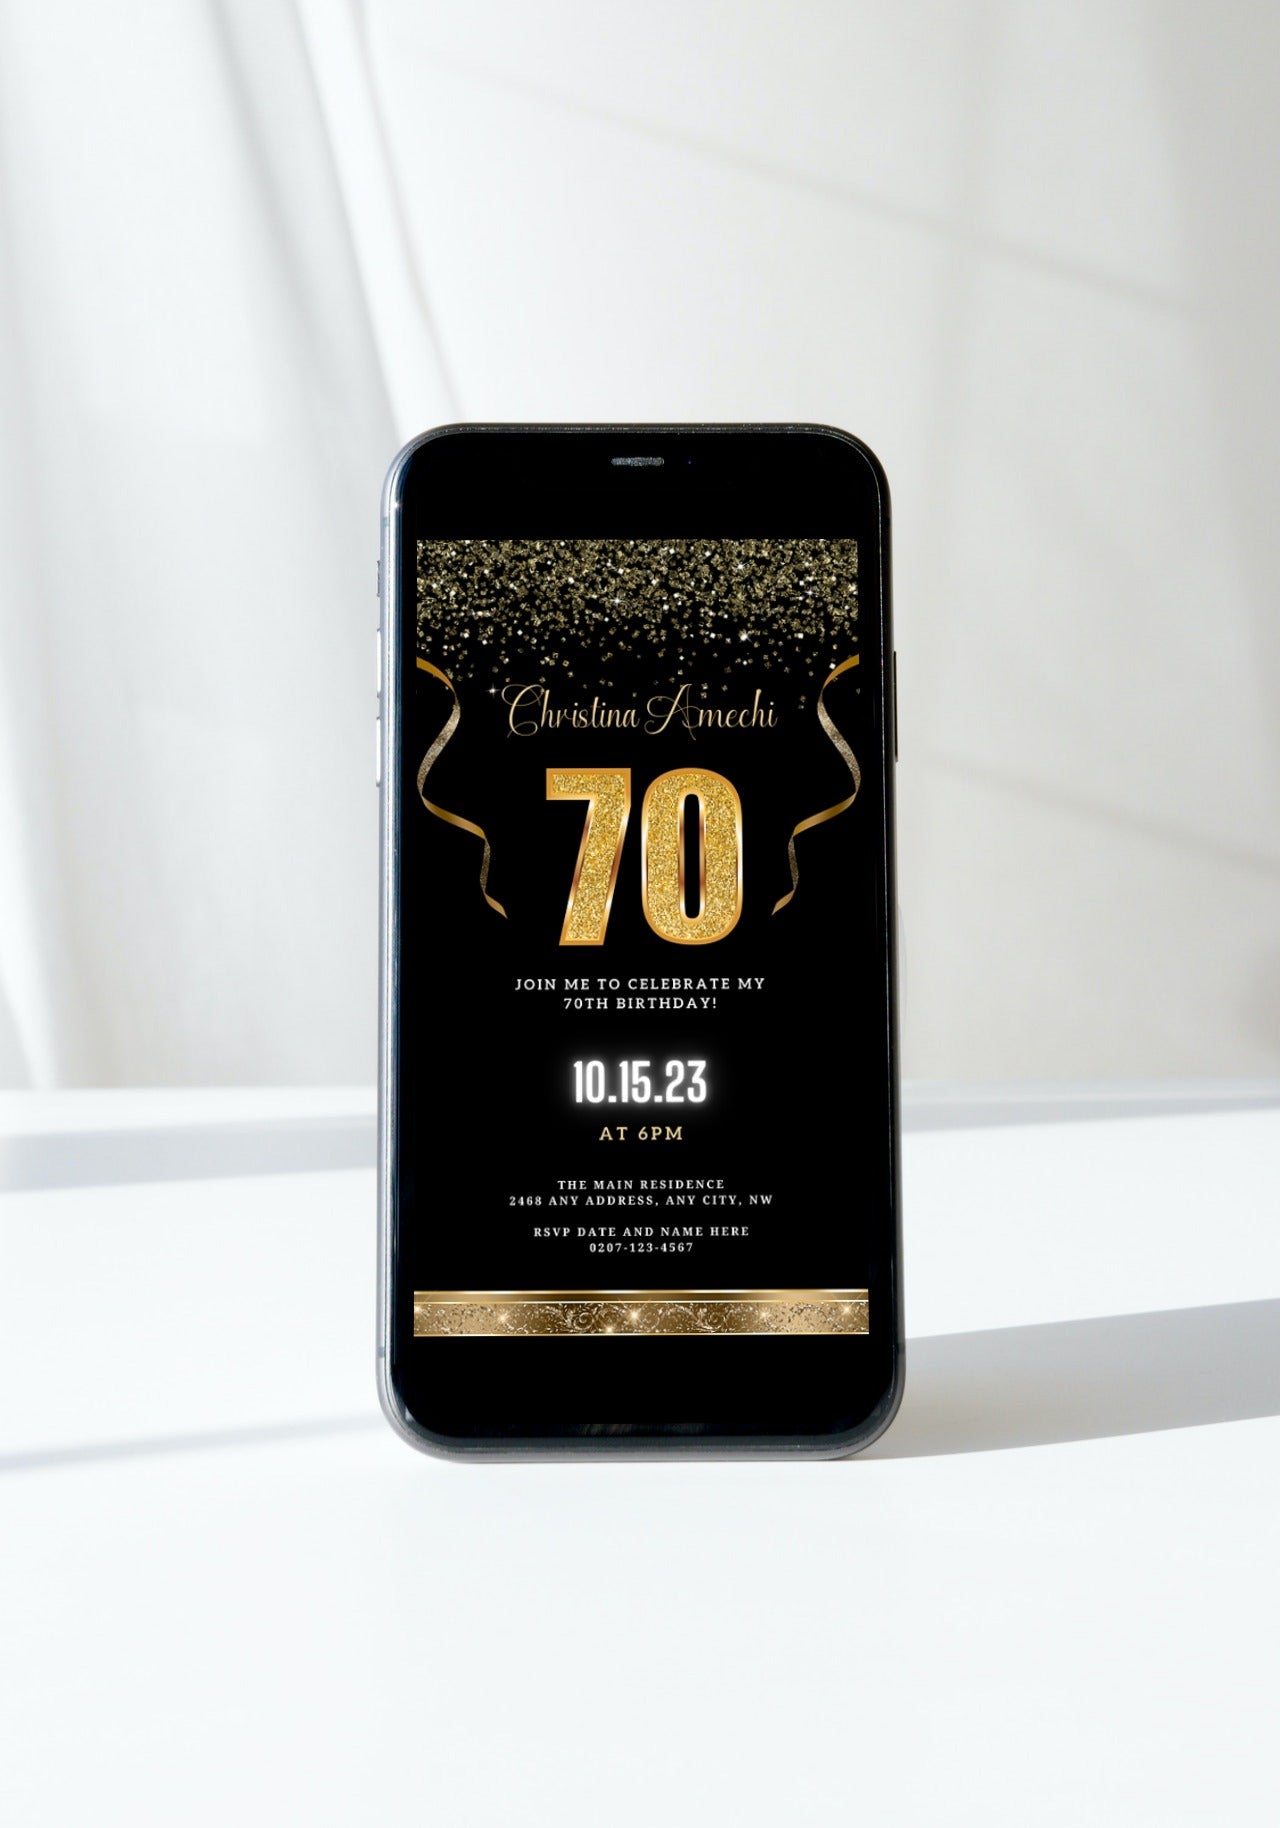 Black Gold Confetti 70th Birthday Evite displayed on a smartphone, showcasing a customizable digital invitation template with celebratory gold text and decorative elements.